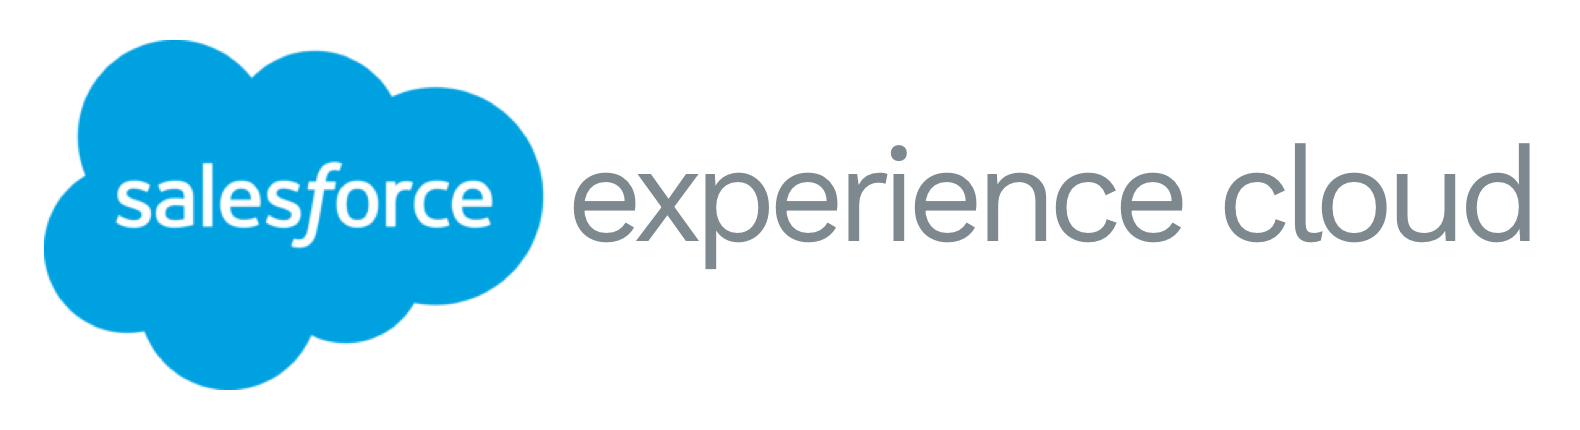 Powered By Expreience Cloud